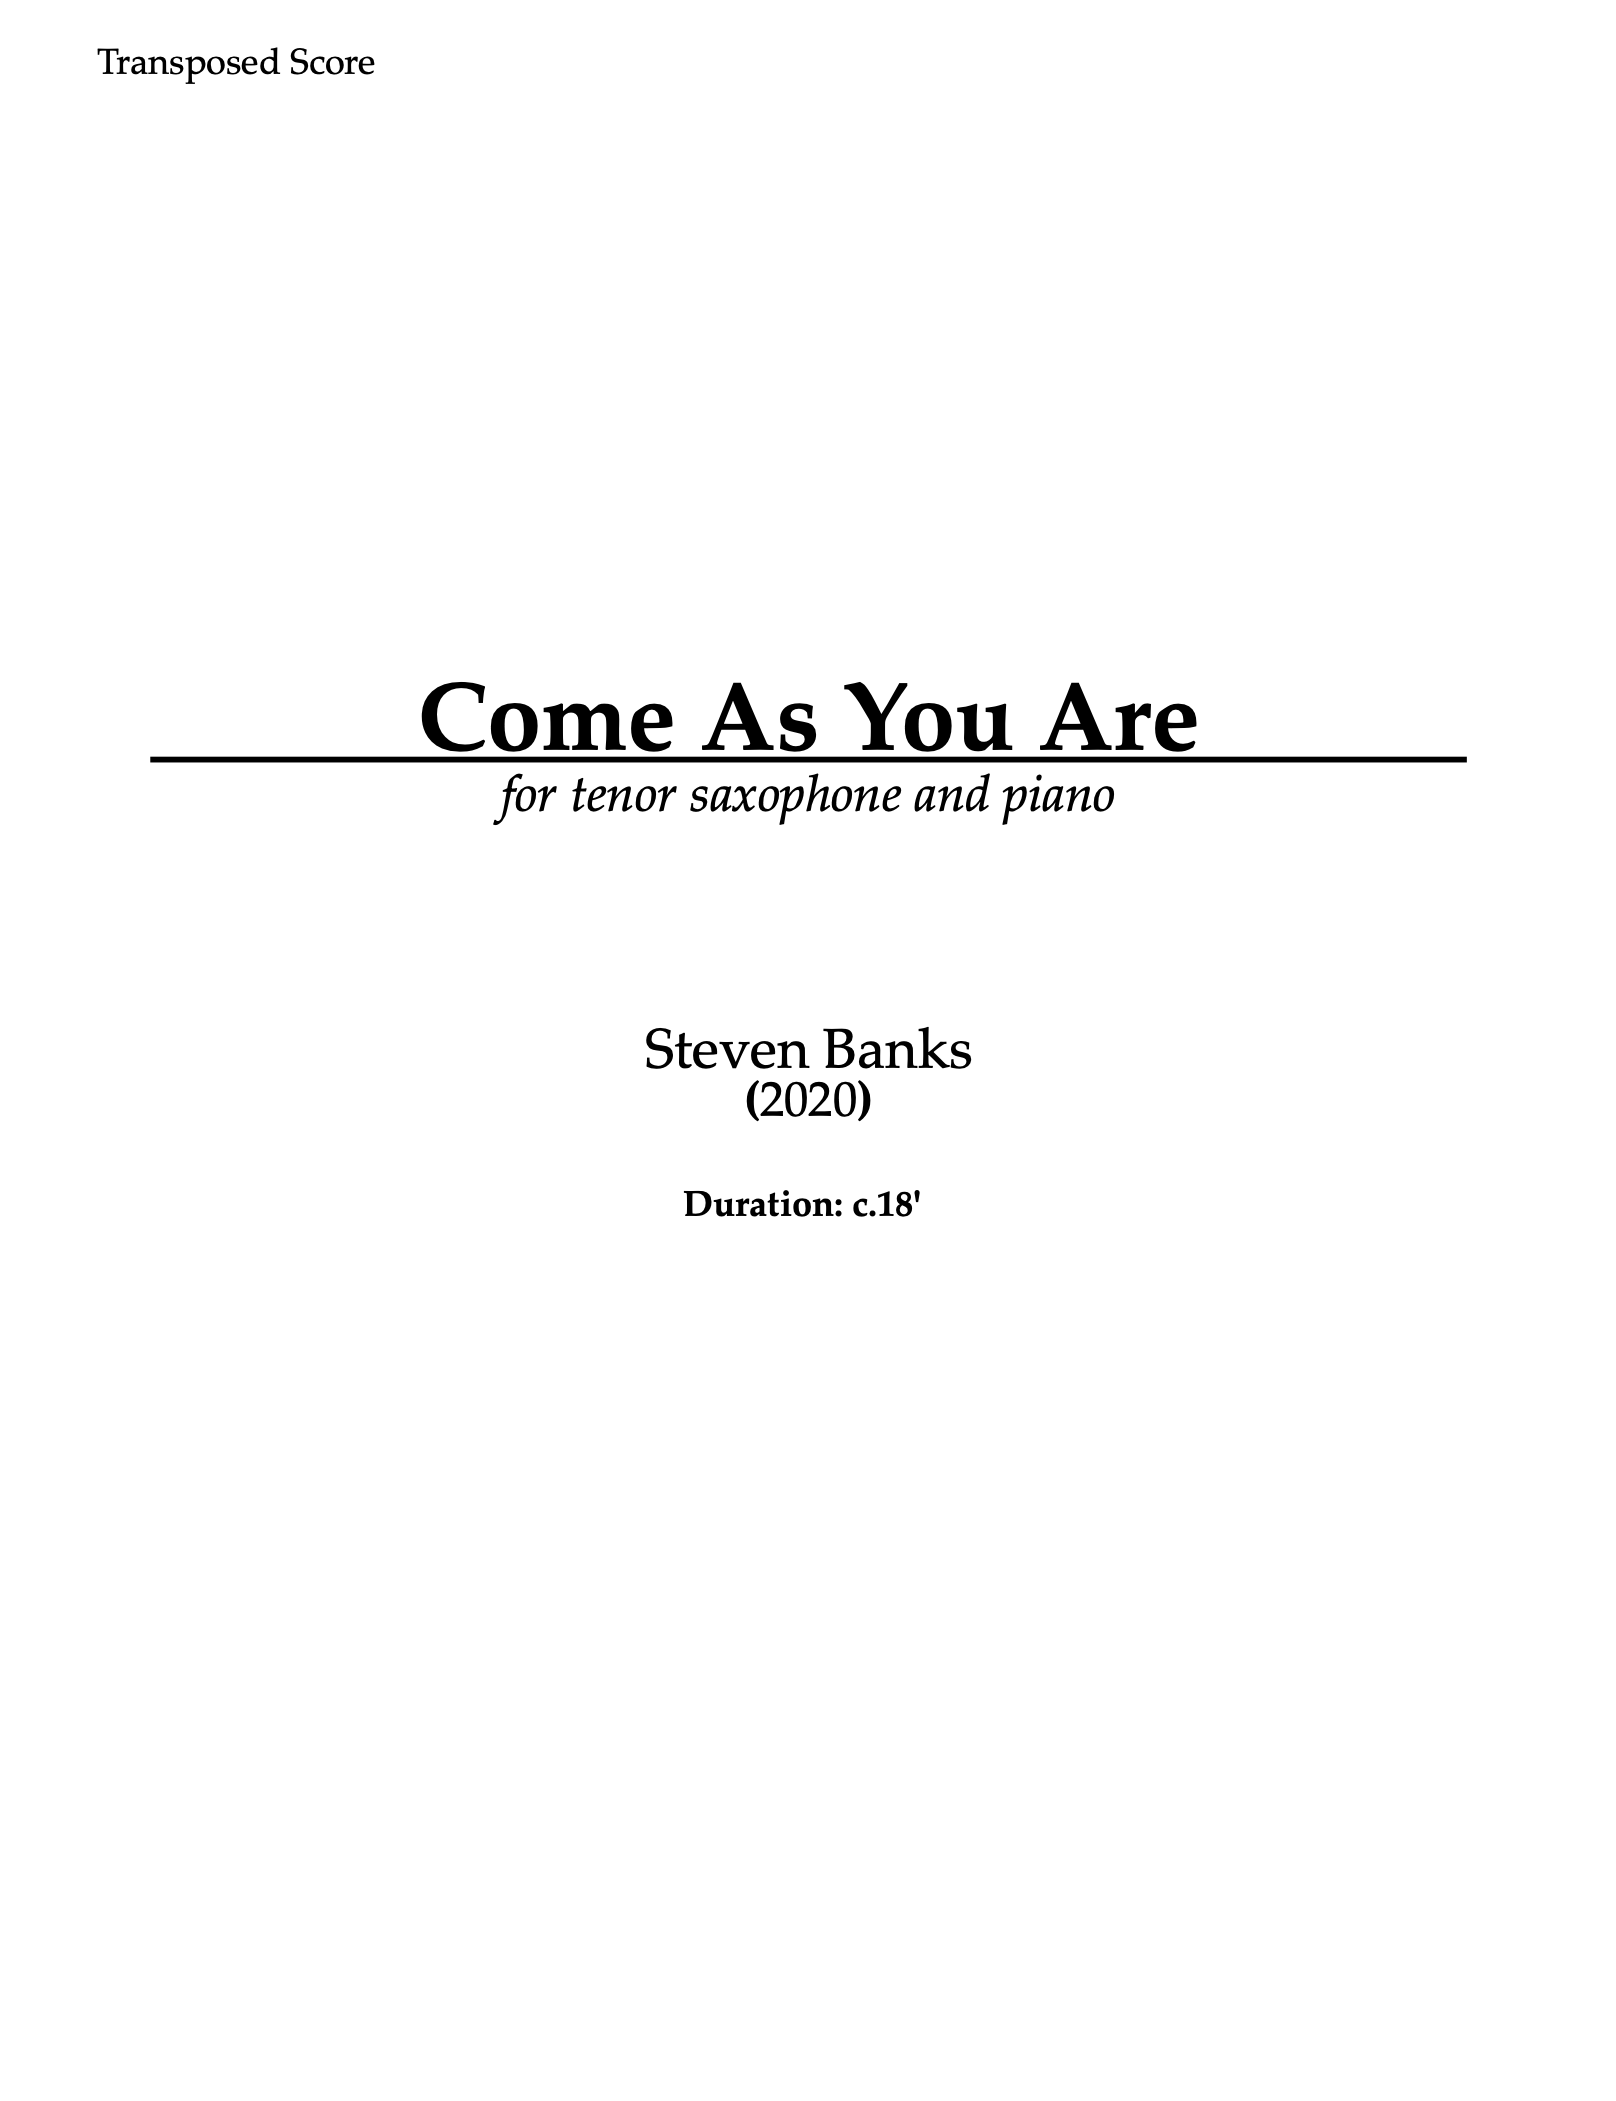 Come As You Are by Steven Banks